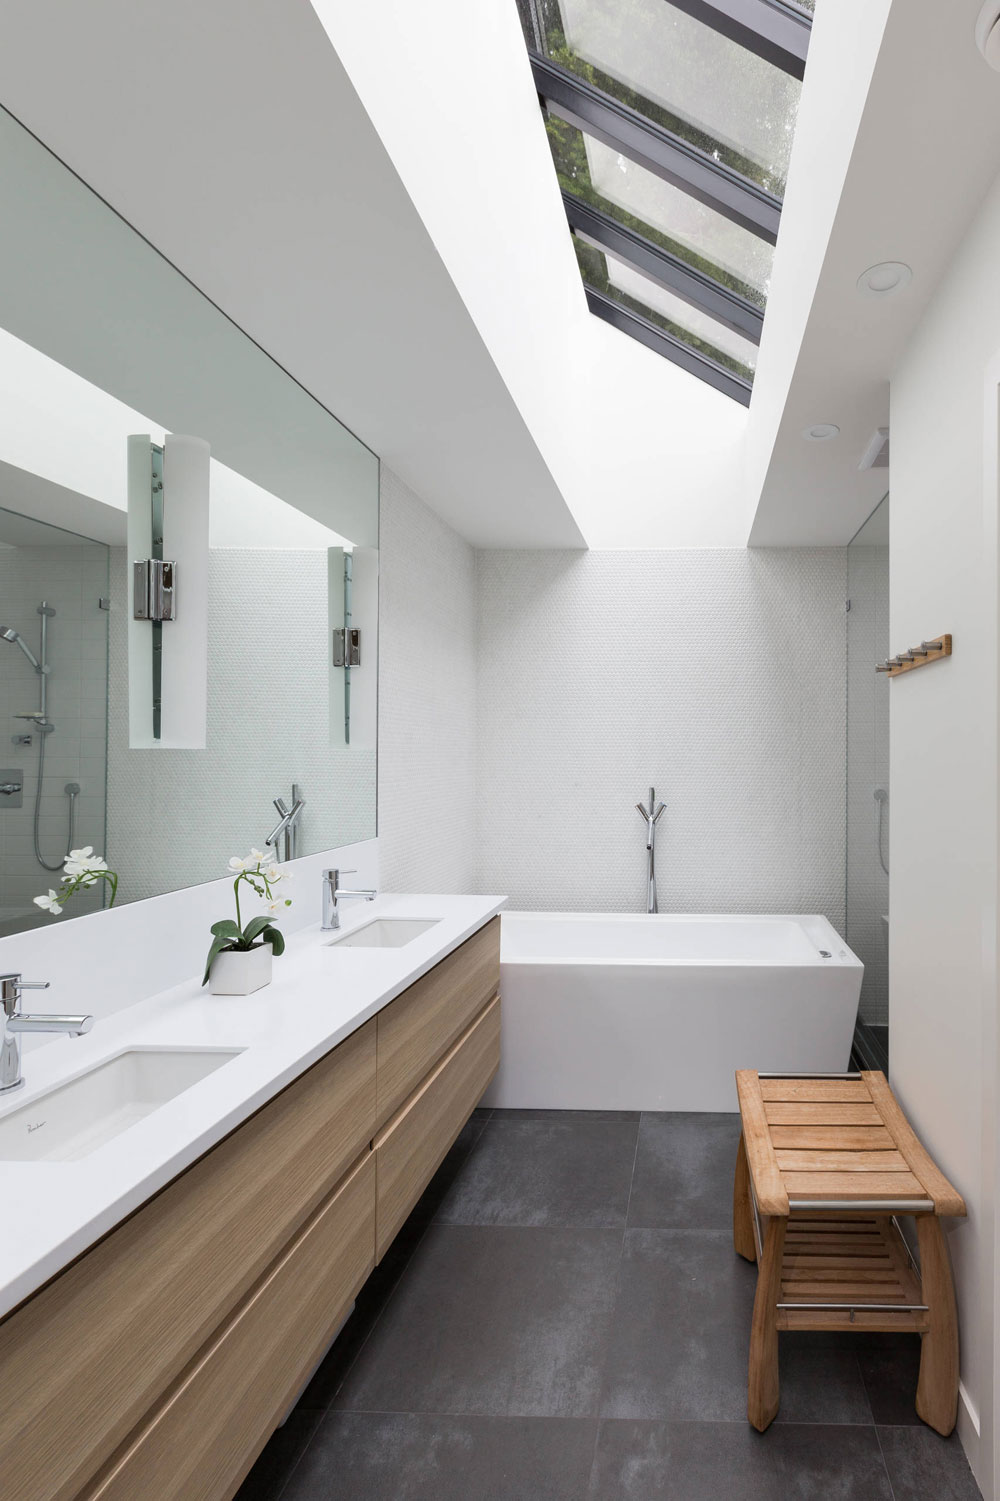 Bathrooms with skylights that will make you rethink your design 9 bathrooms with skylights that will make you rethink your design